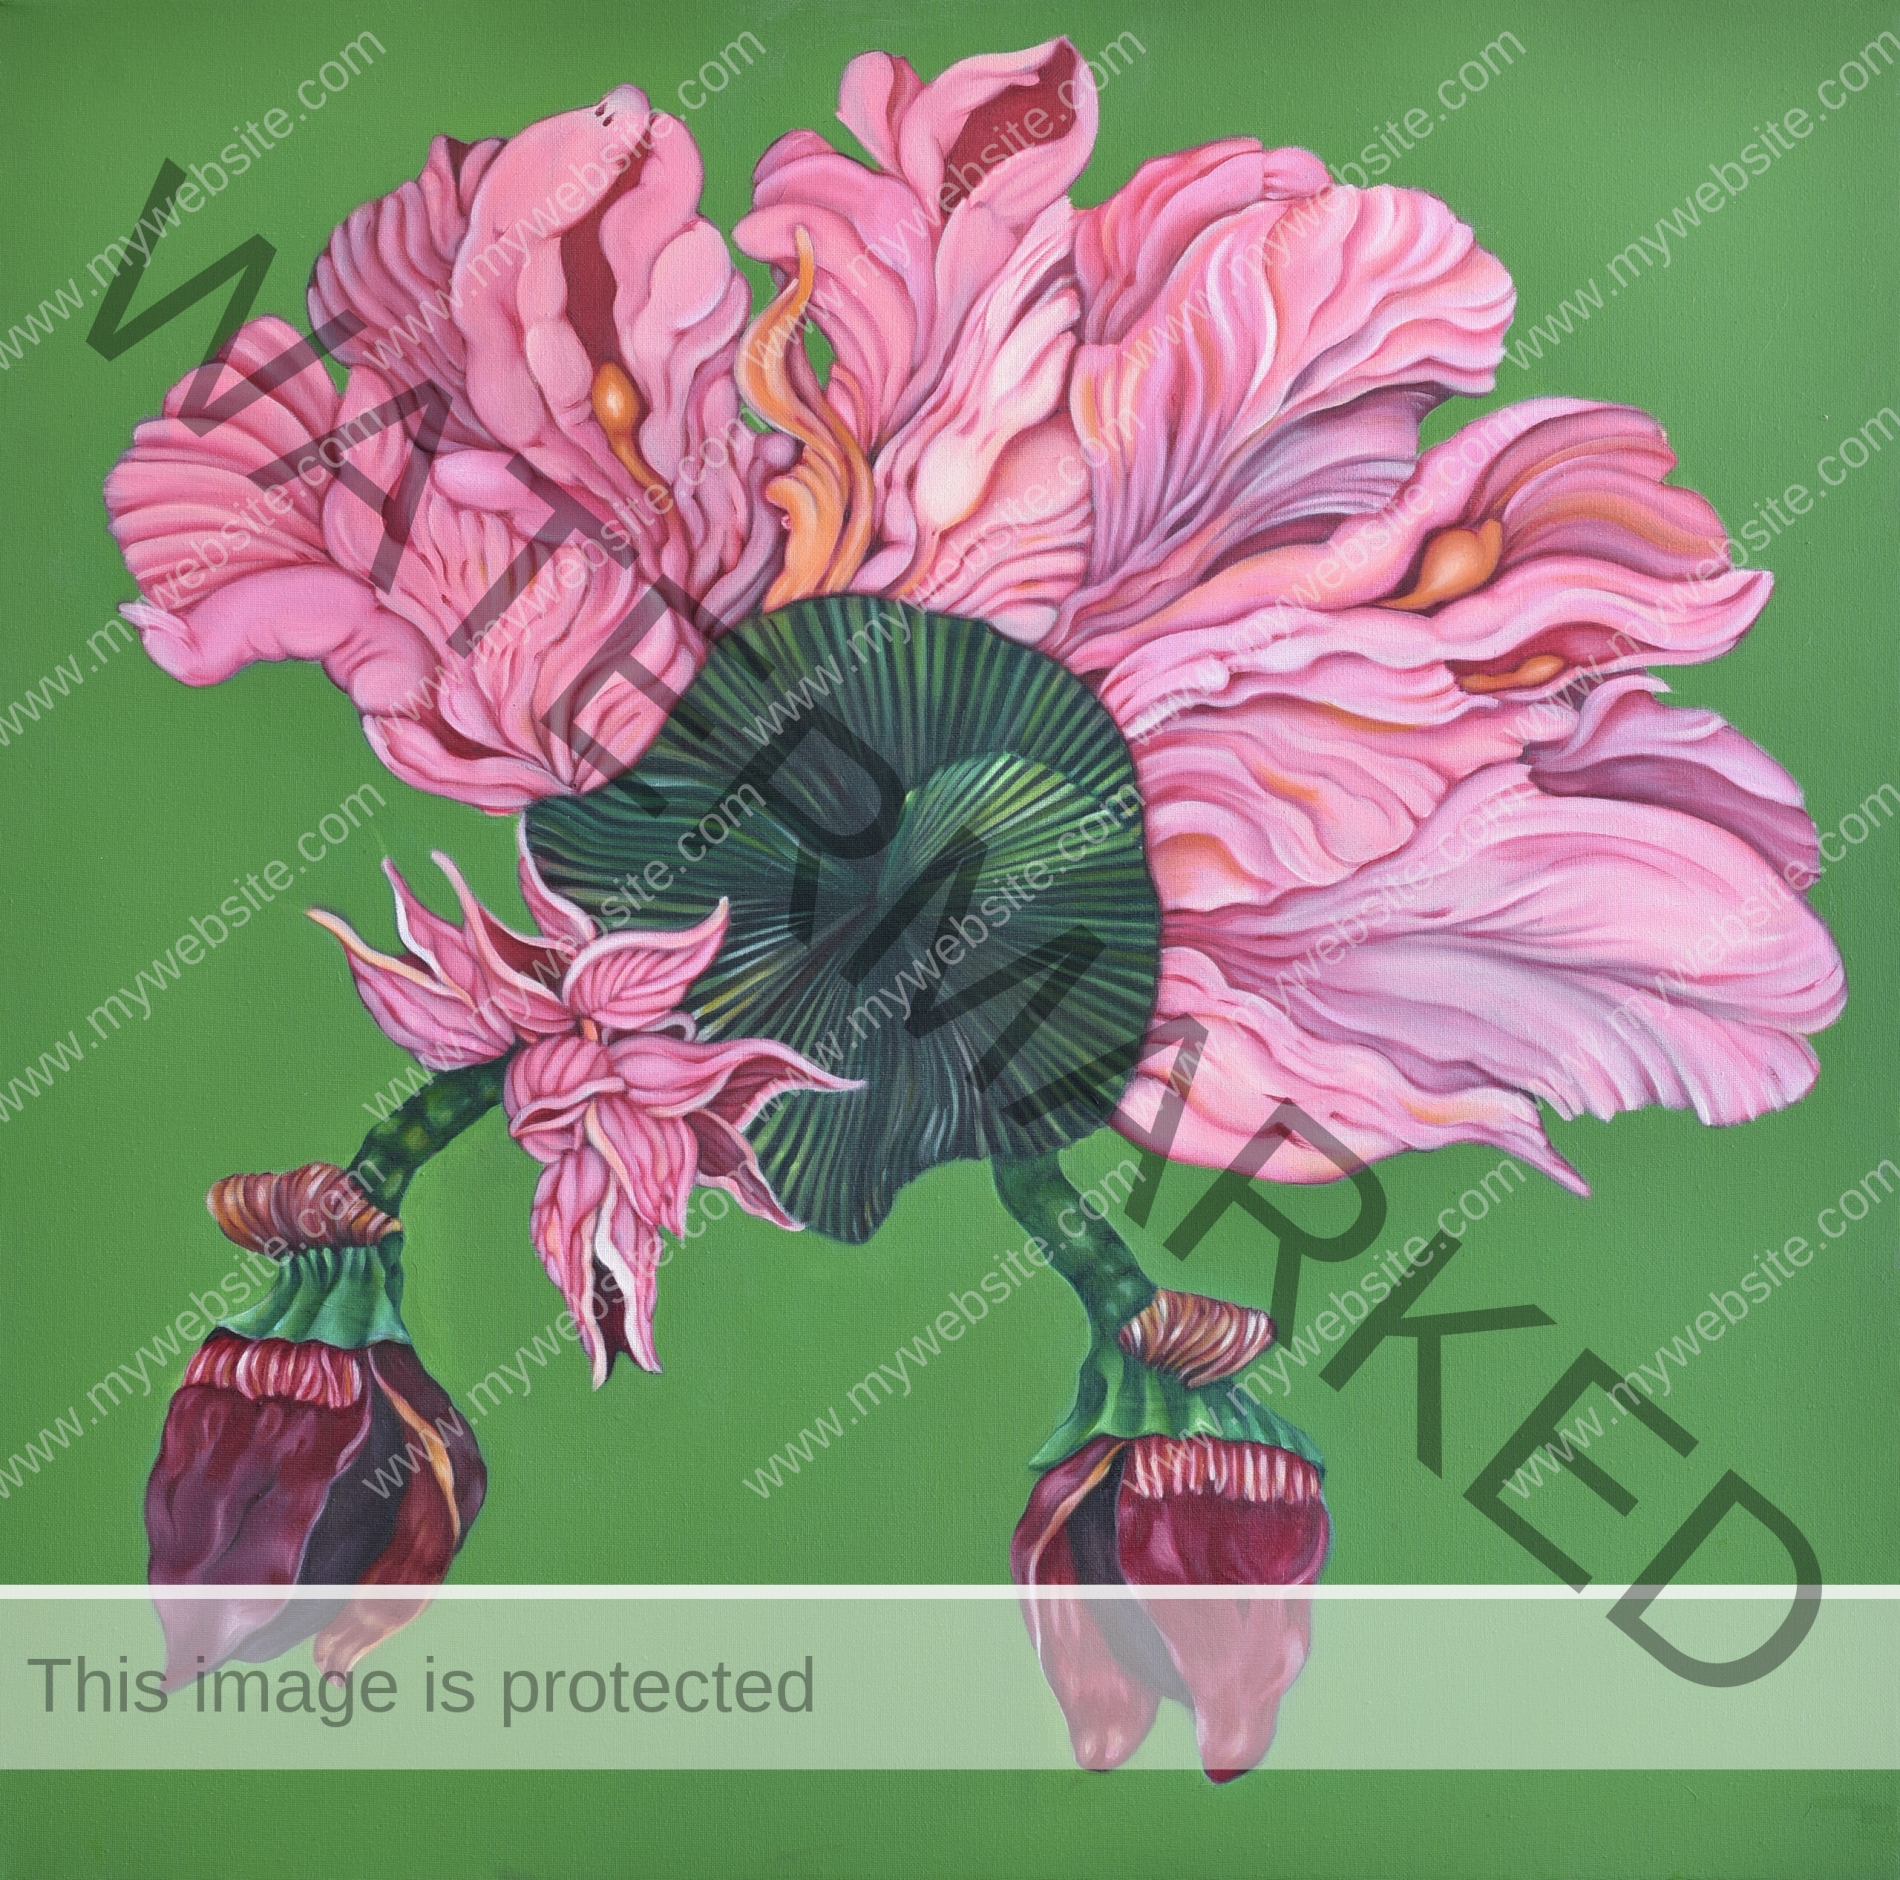 Bright, colourful floral painting featuring pink petals against an abstract green background. This painting by Daniela Marten Rothe evokes a sense of eroticism, sensuality and feminine power. Sensual flower painting